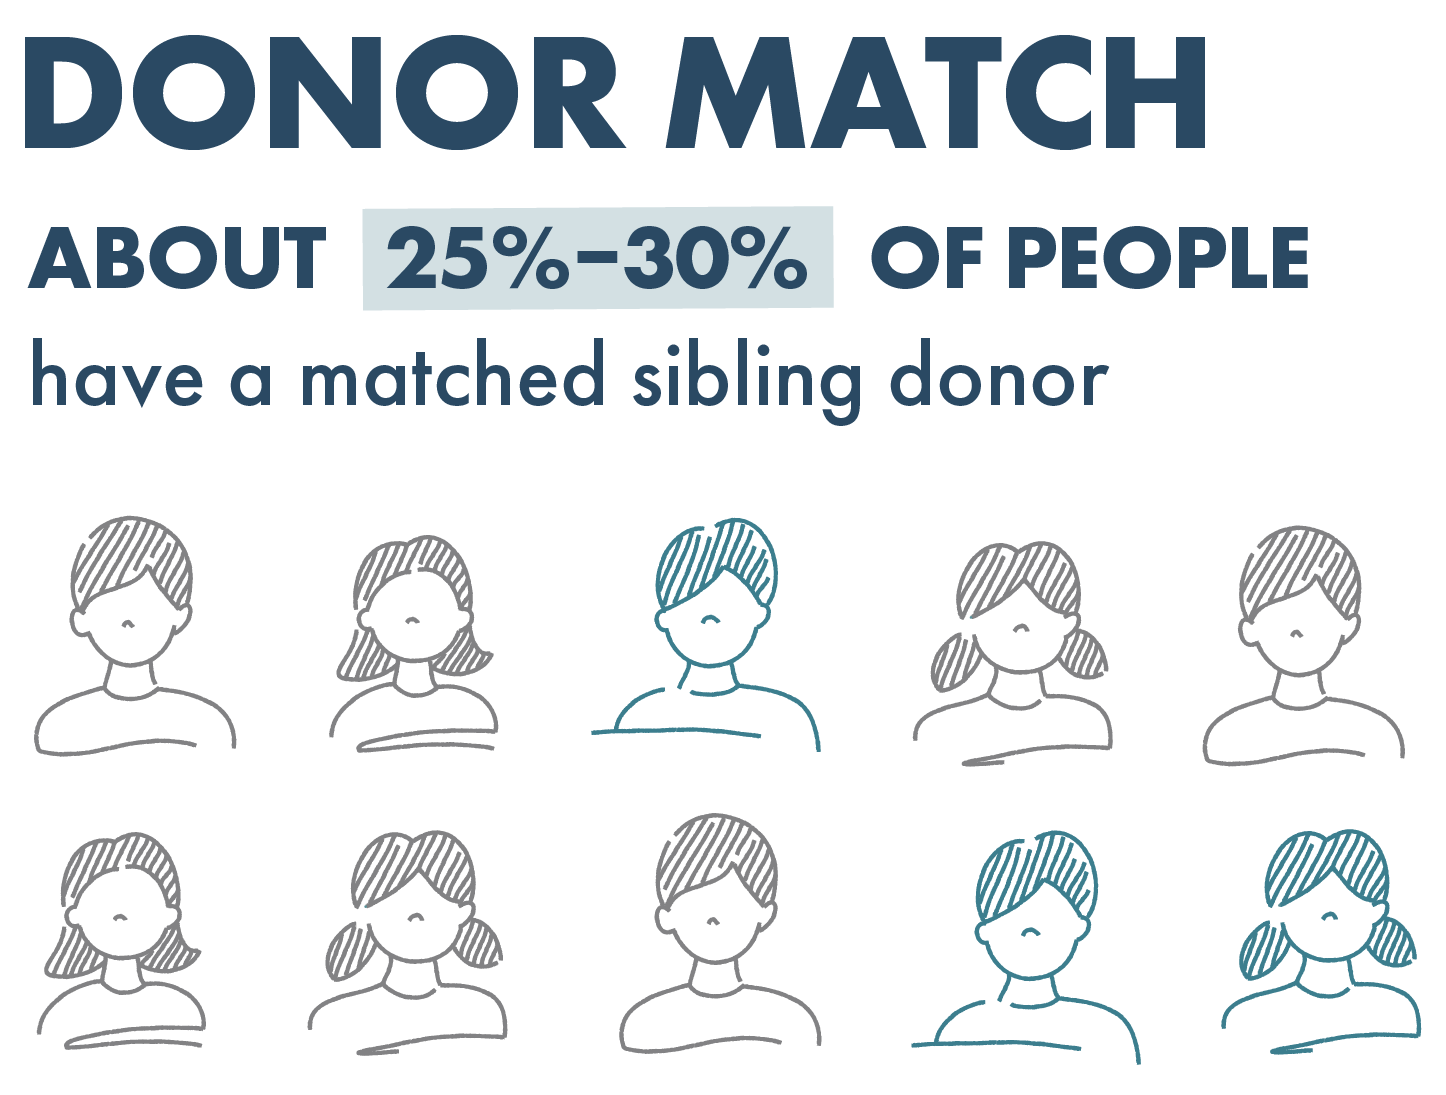 Stem cell transplant likeliness of a matched sibling donor